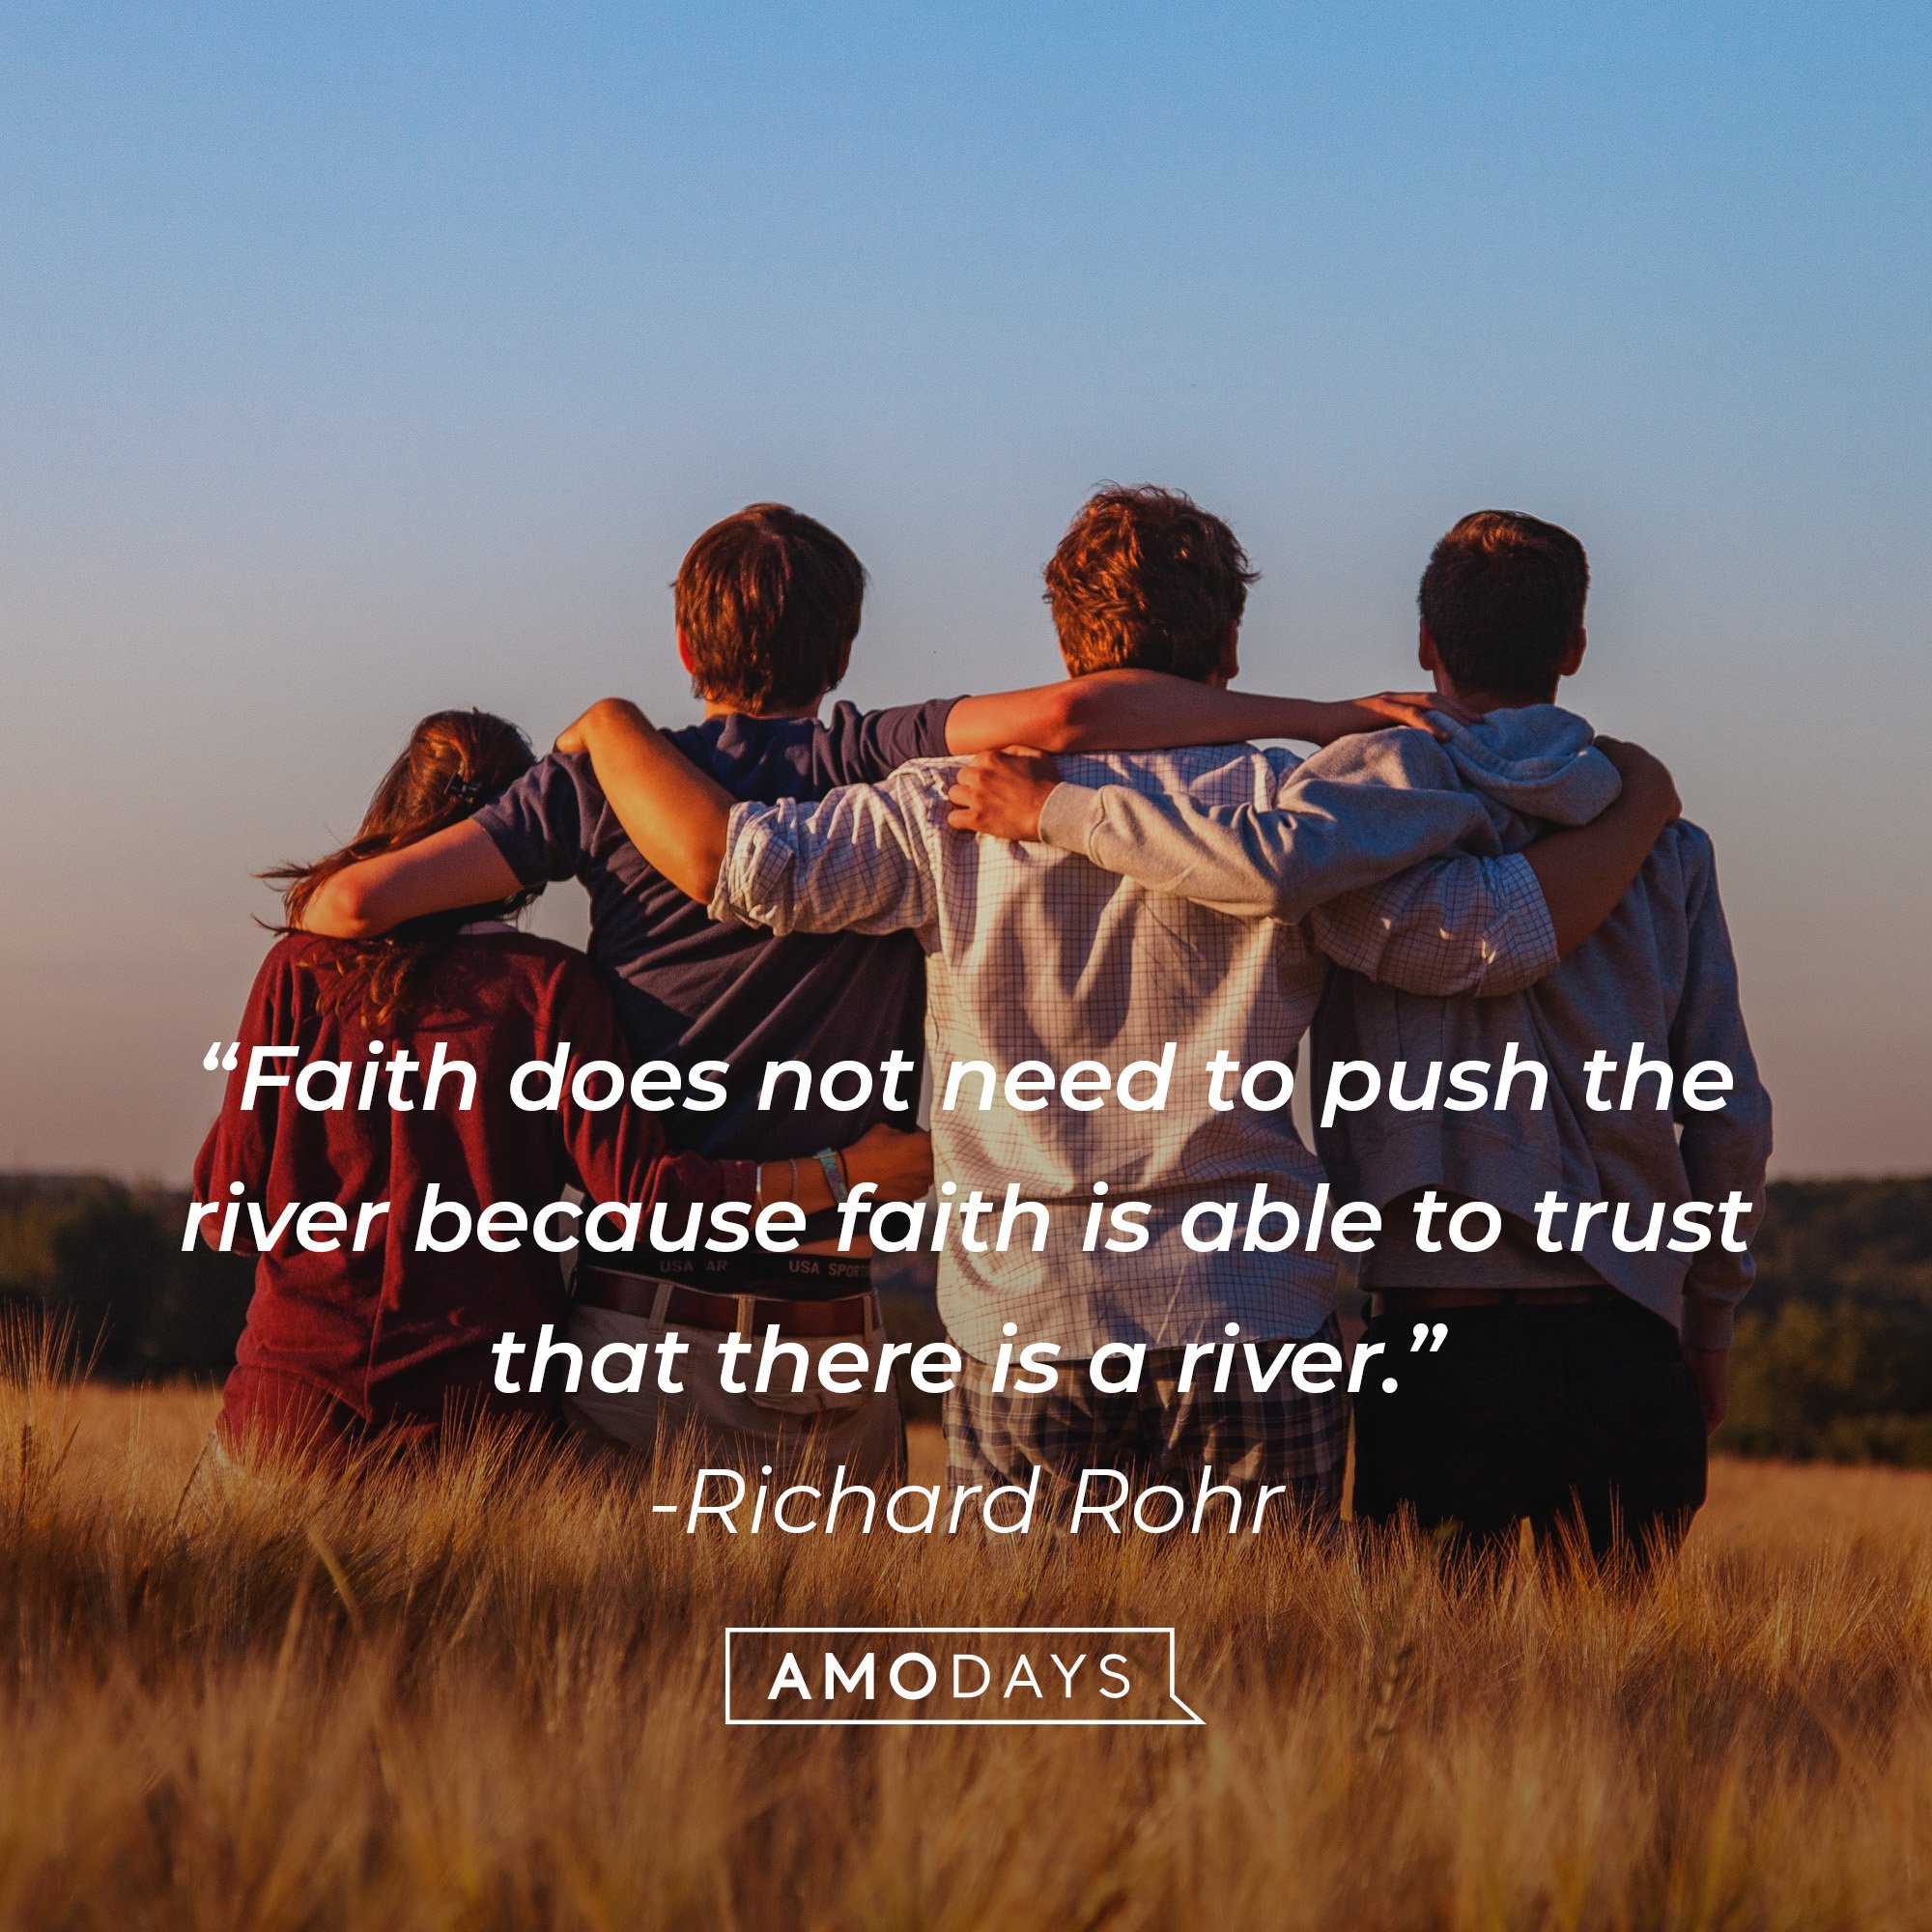 Richard Rohr’s quote: “Faith does not need to push the river because faith is able to trust that there is a river.” | Image: AmoDays